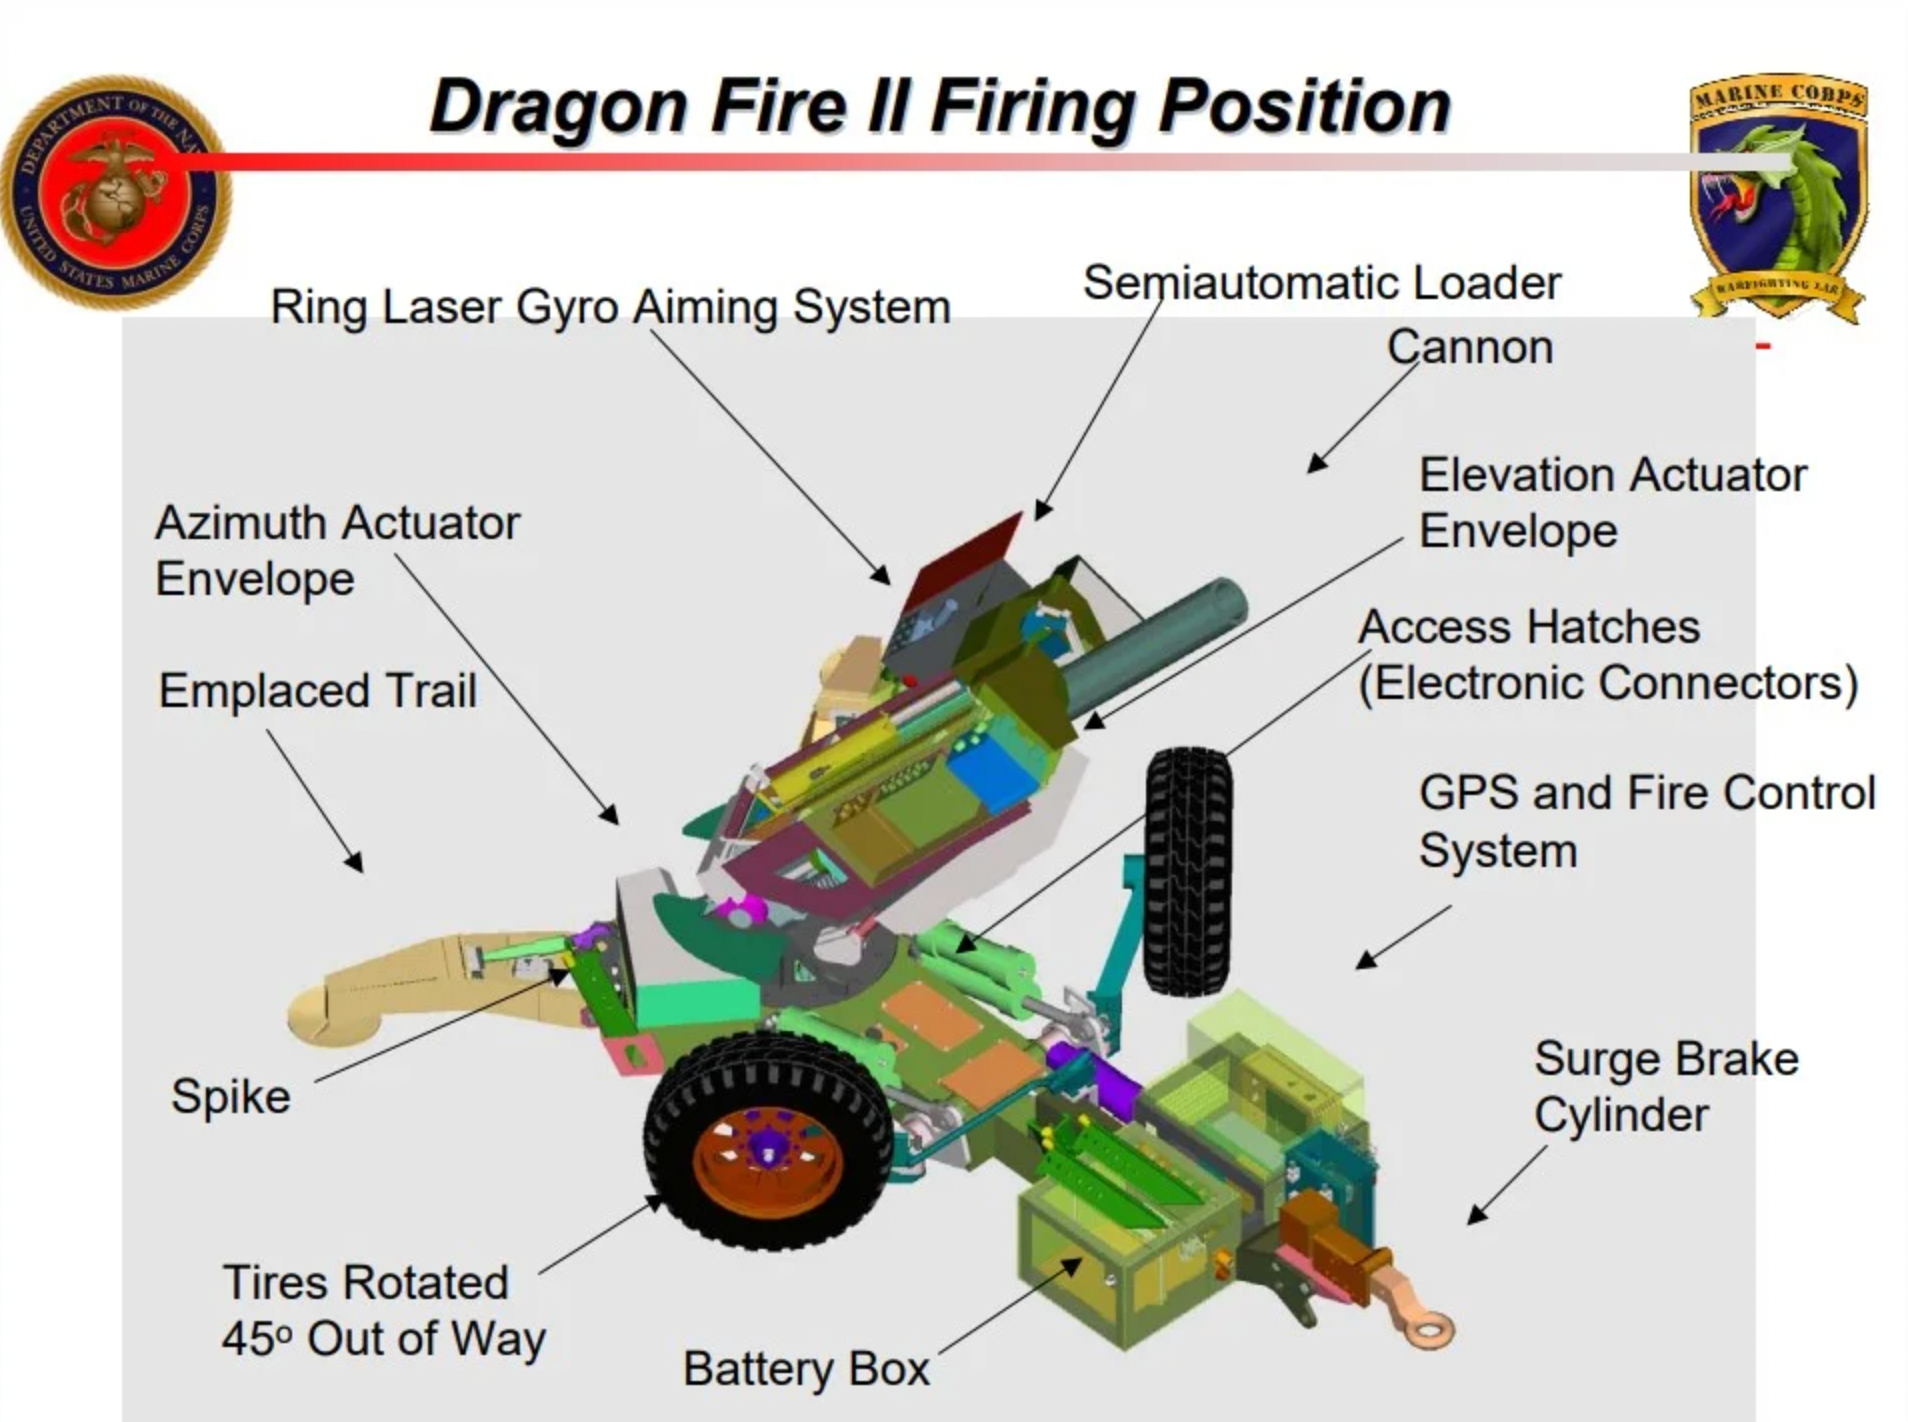 dragon fire II army rangers automatic mortar system